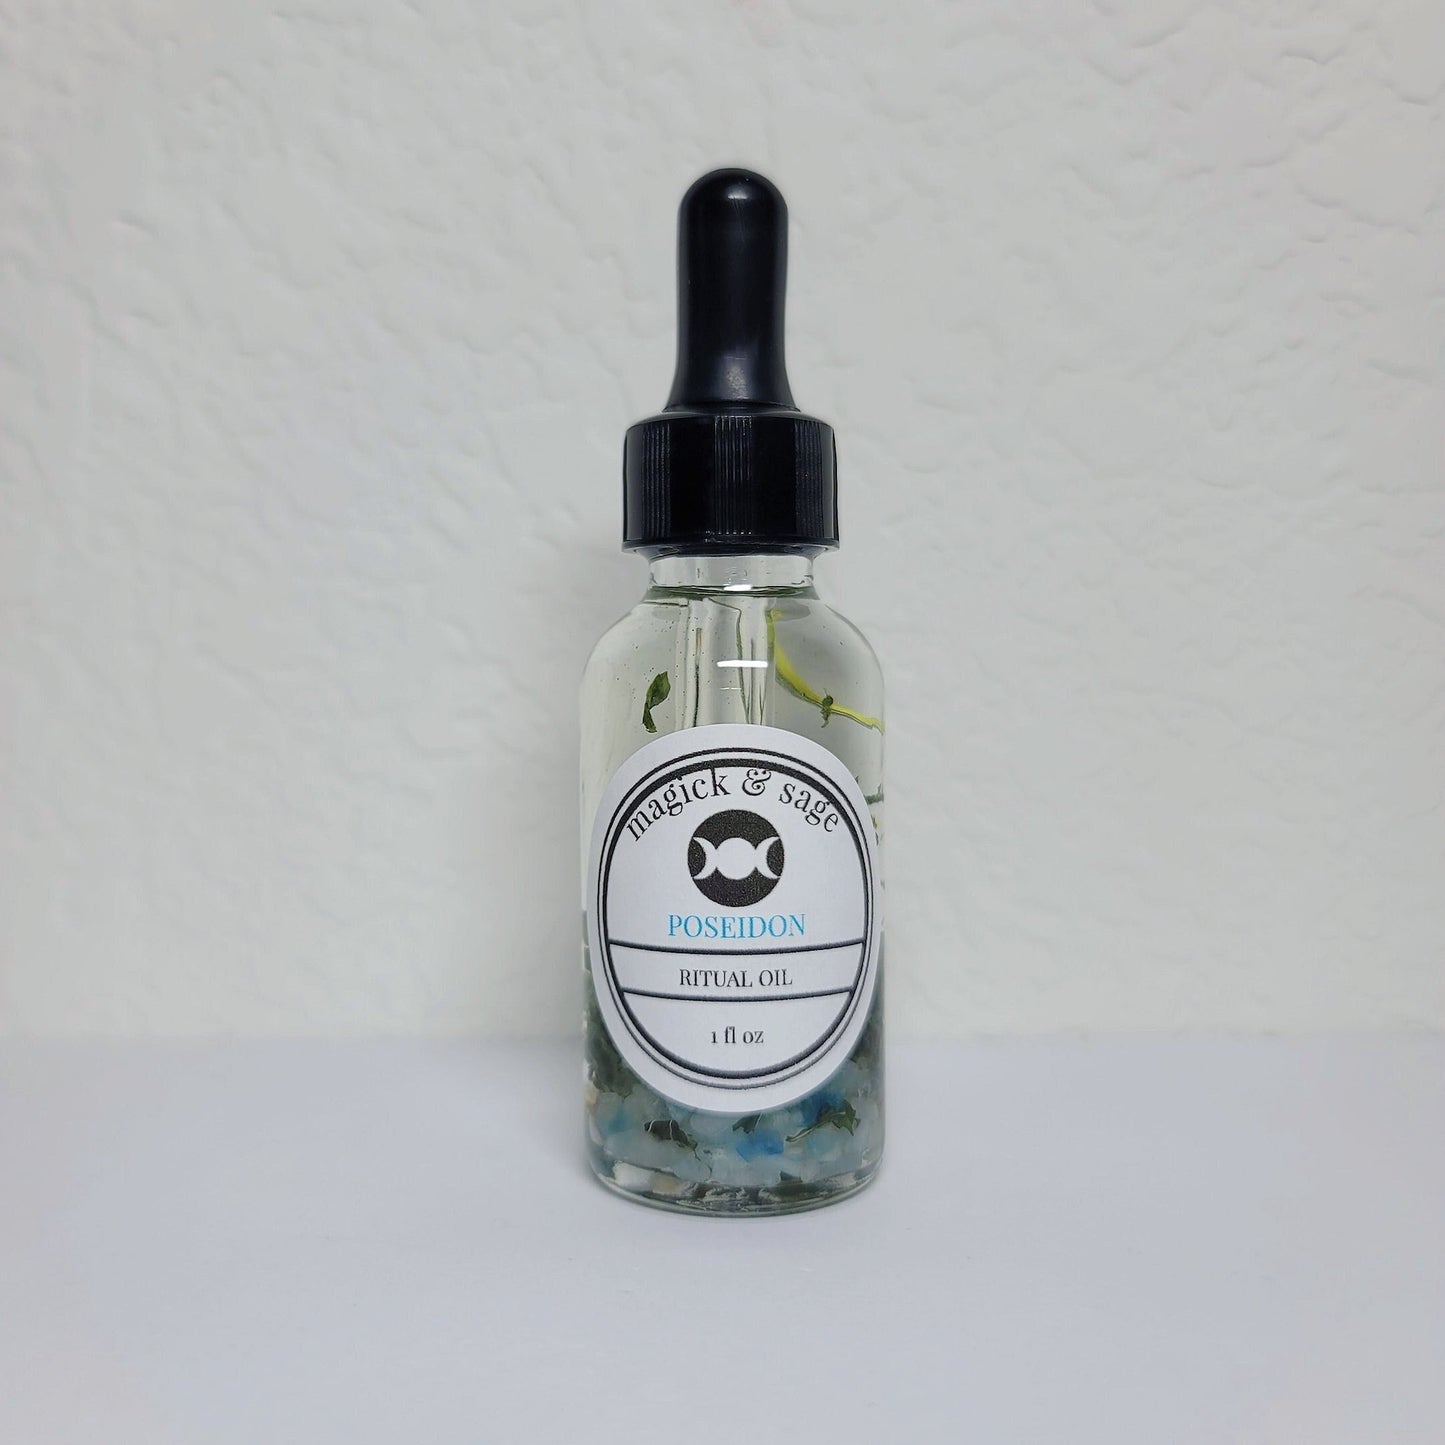 Poseidon God Oil | Ritual & Spell Work, Altars, Invocation, Manifestation, and Intentions